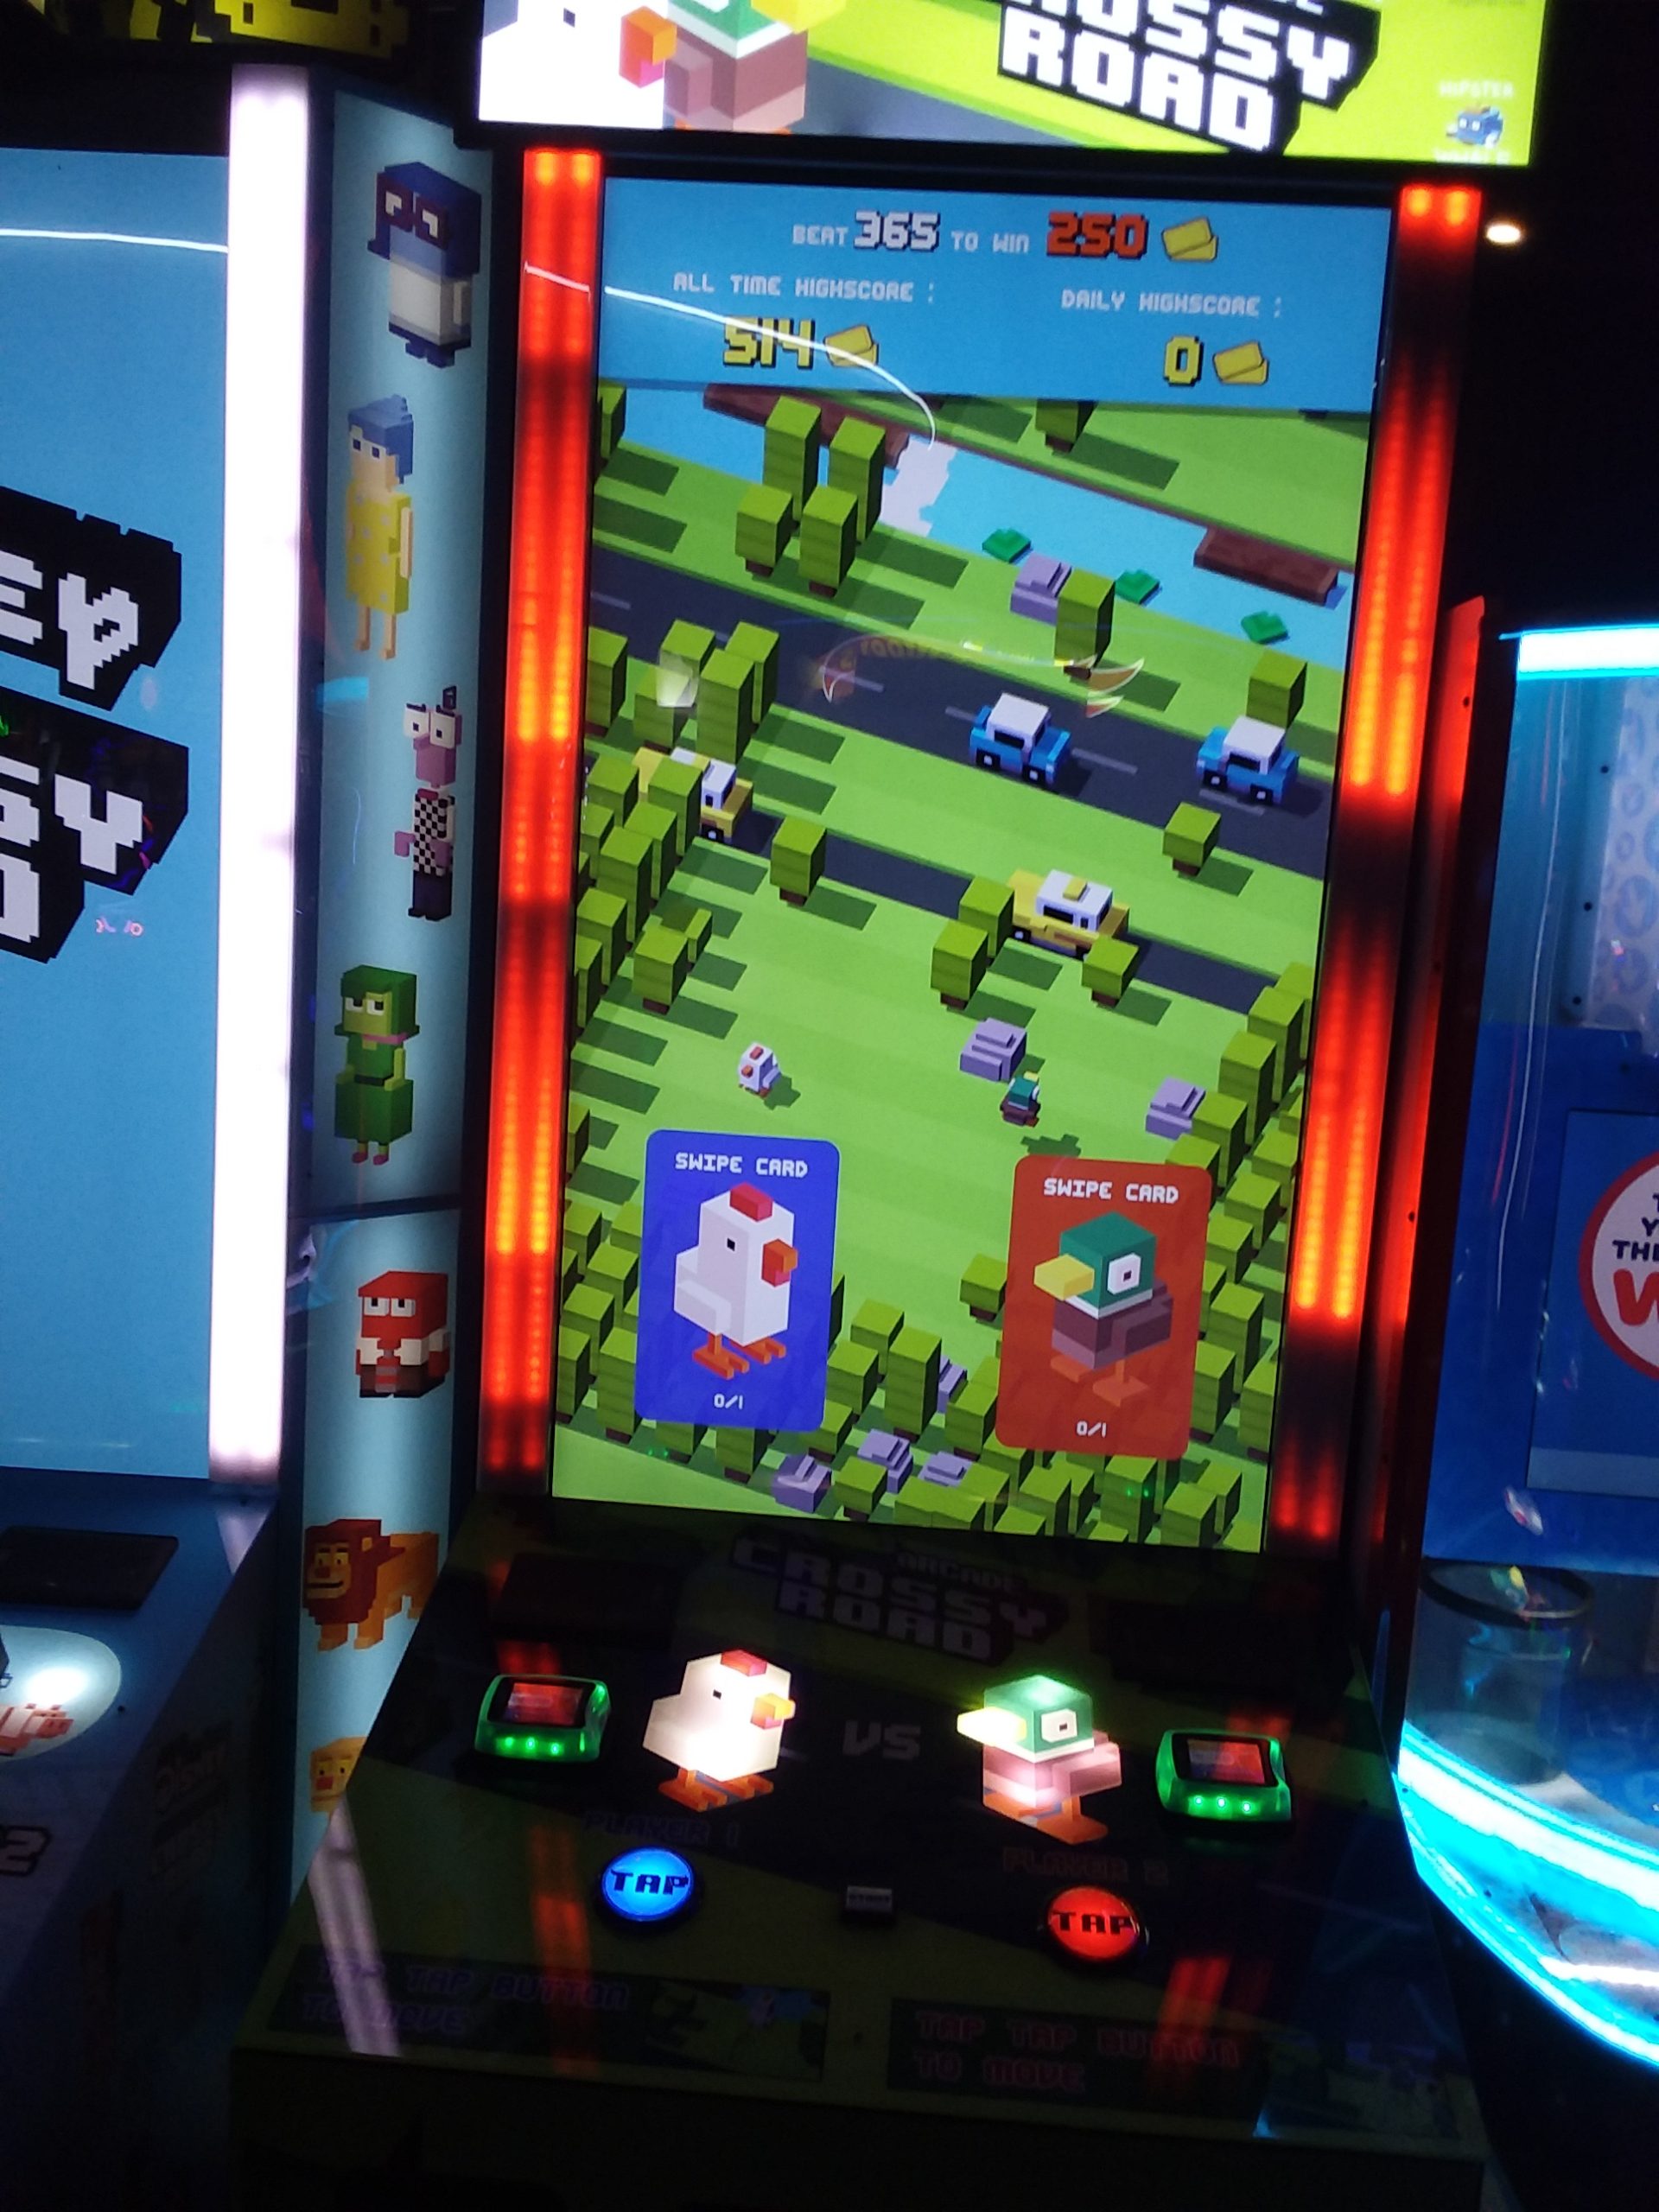 5 Free Popular Phone Apps Turned into Ticket Arcade Games - Arcade Advantage